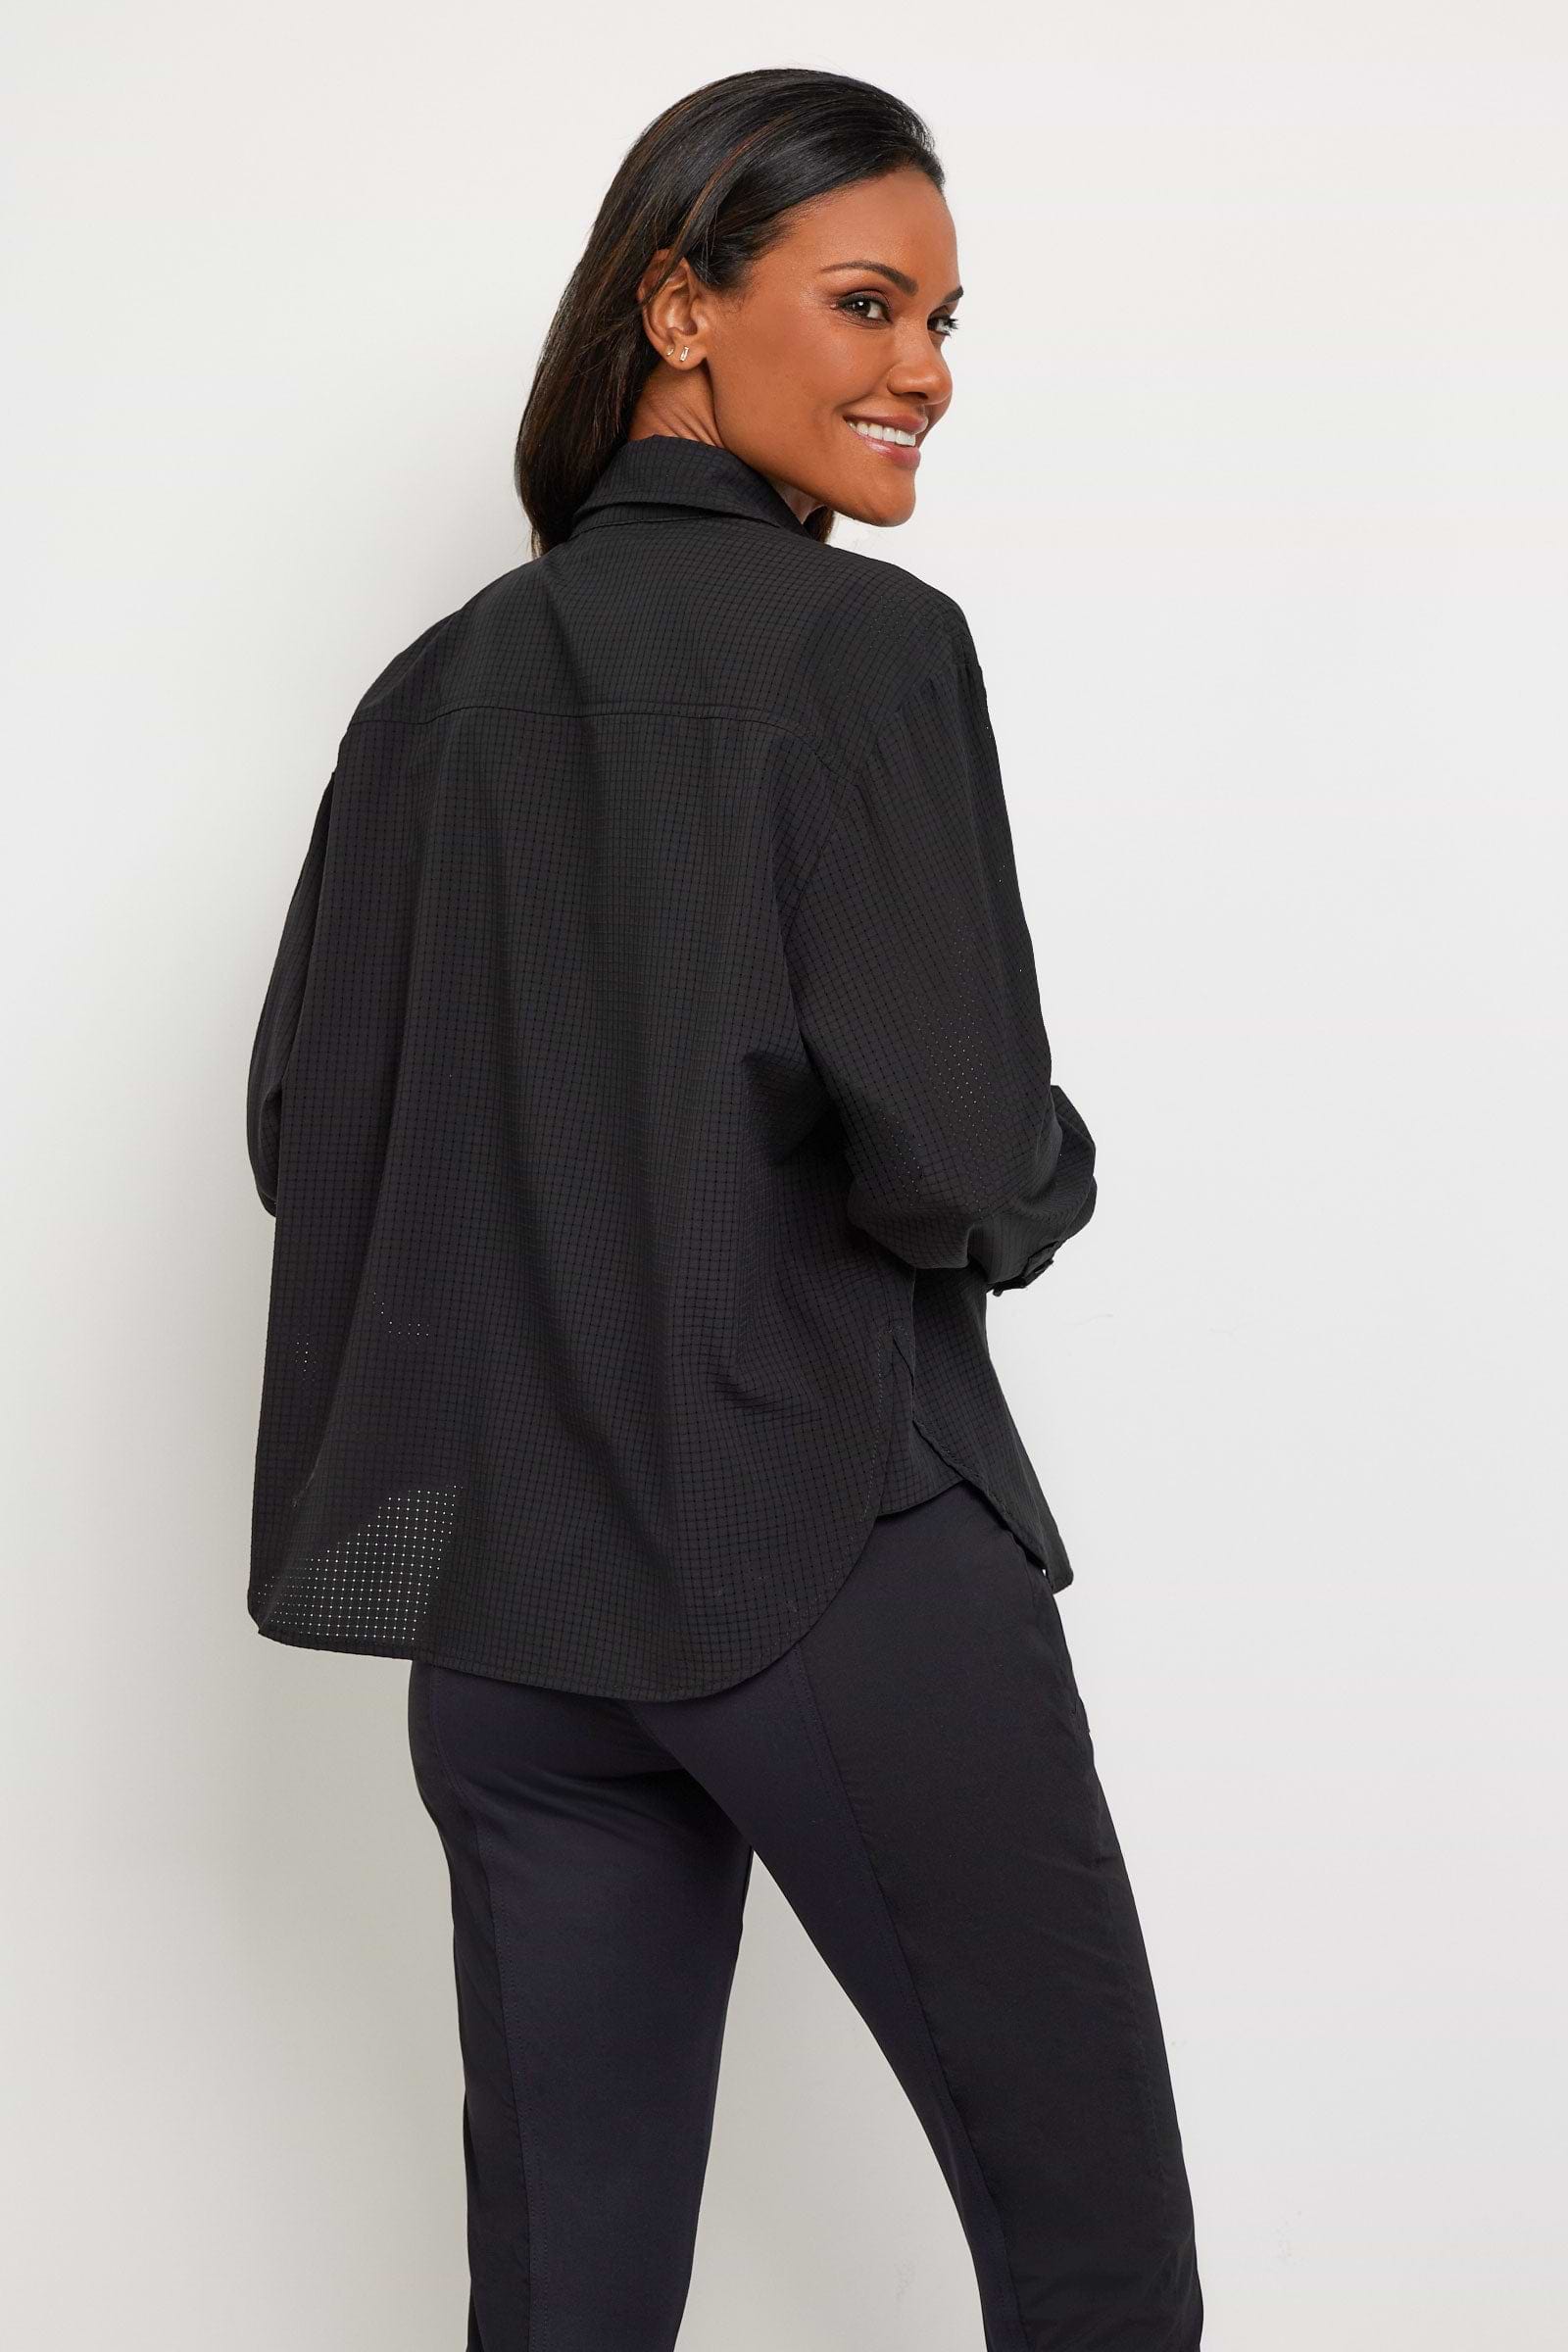 The Best Travel Top. Woman Showing the Back Profile of a Kieran Top in Black.